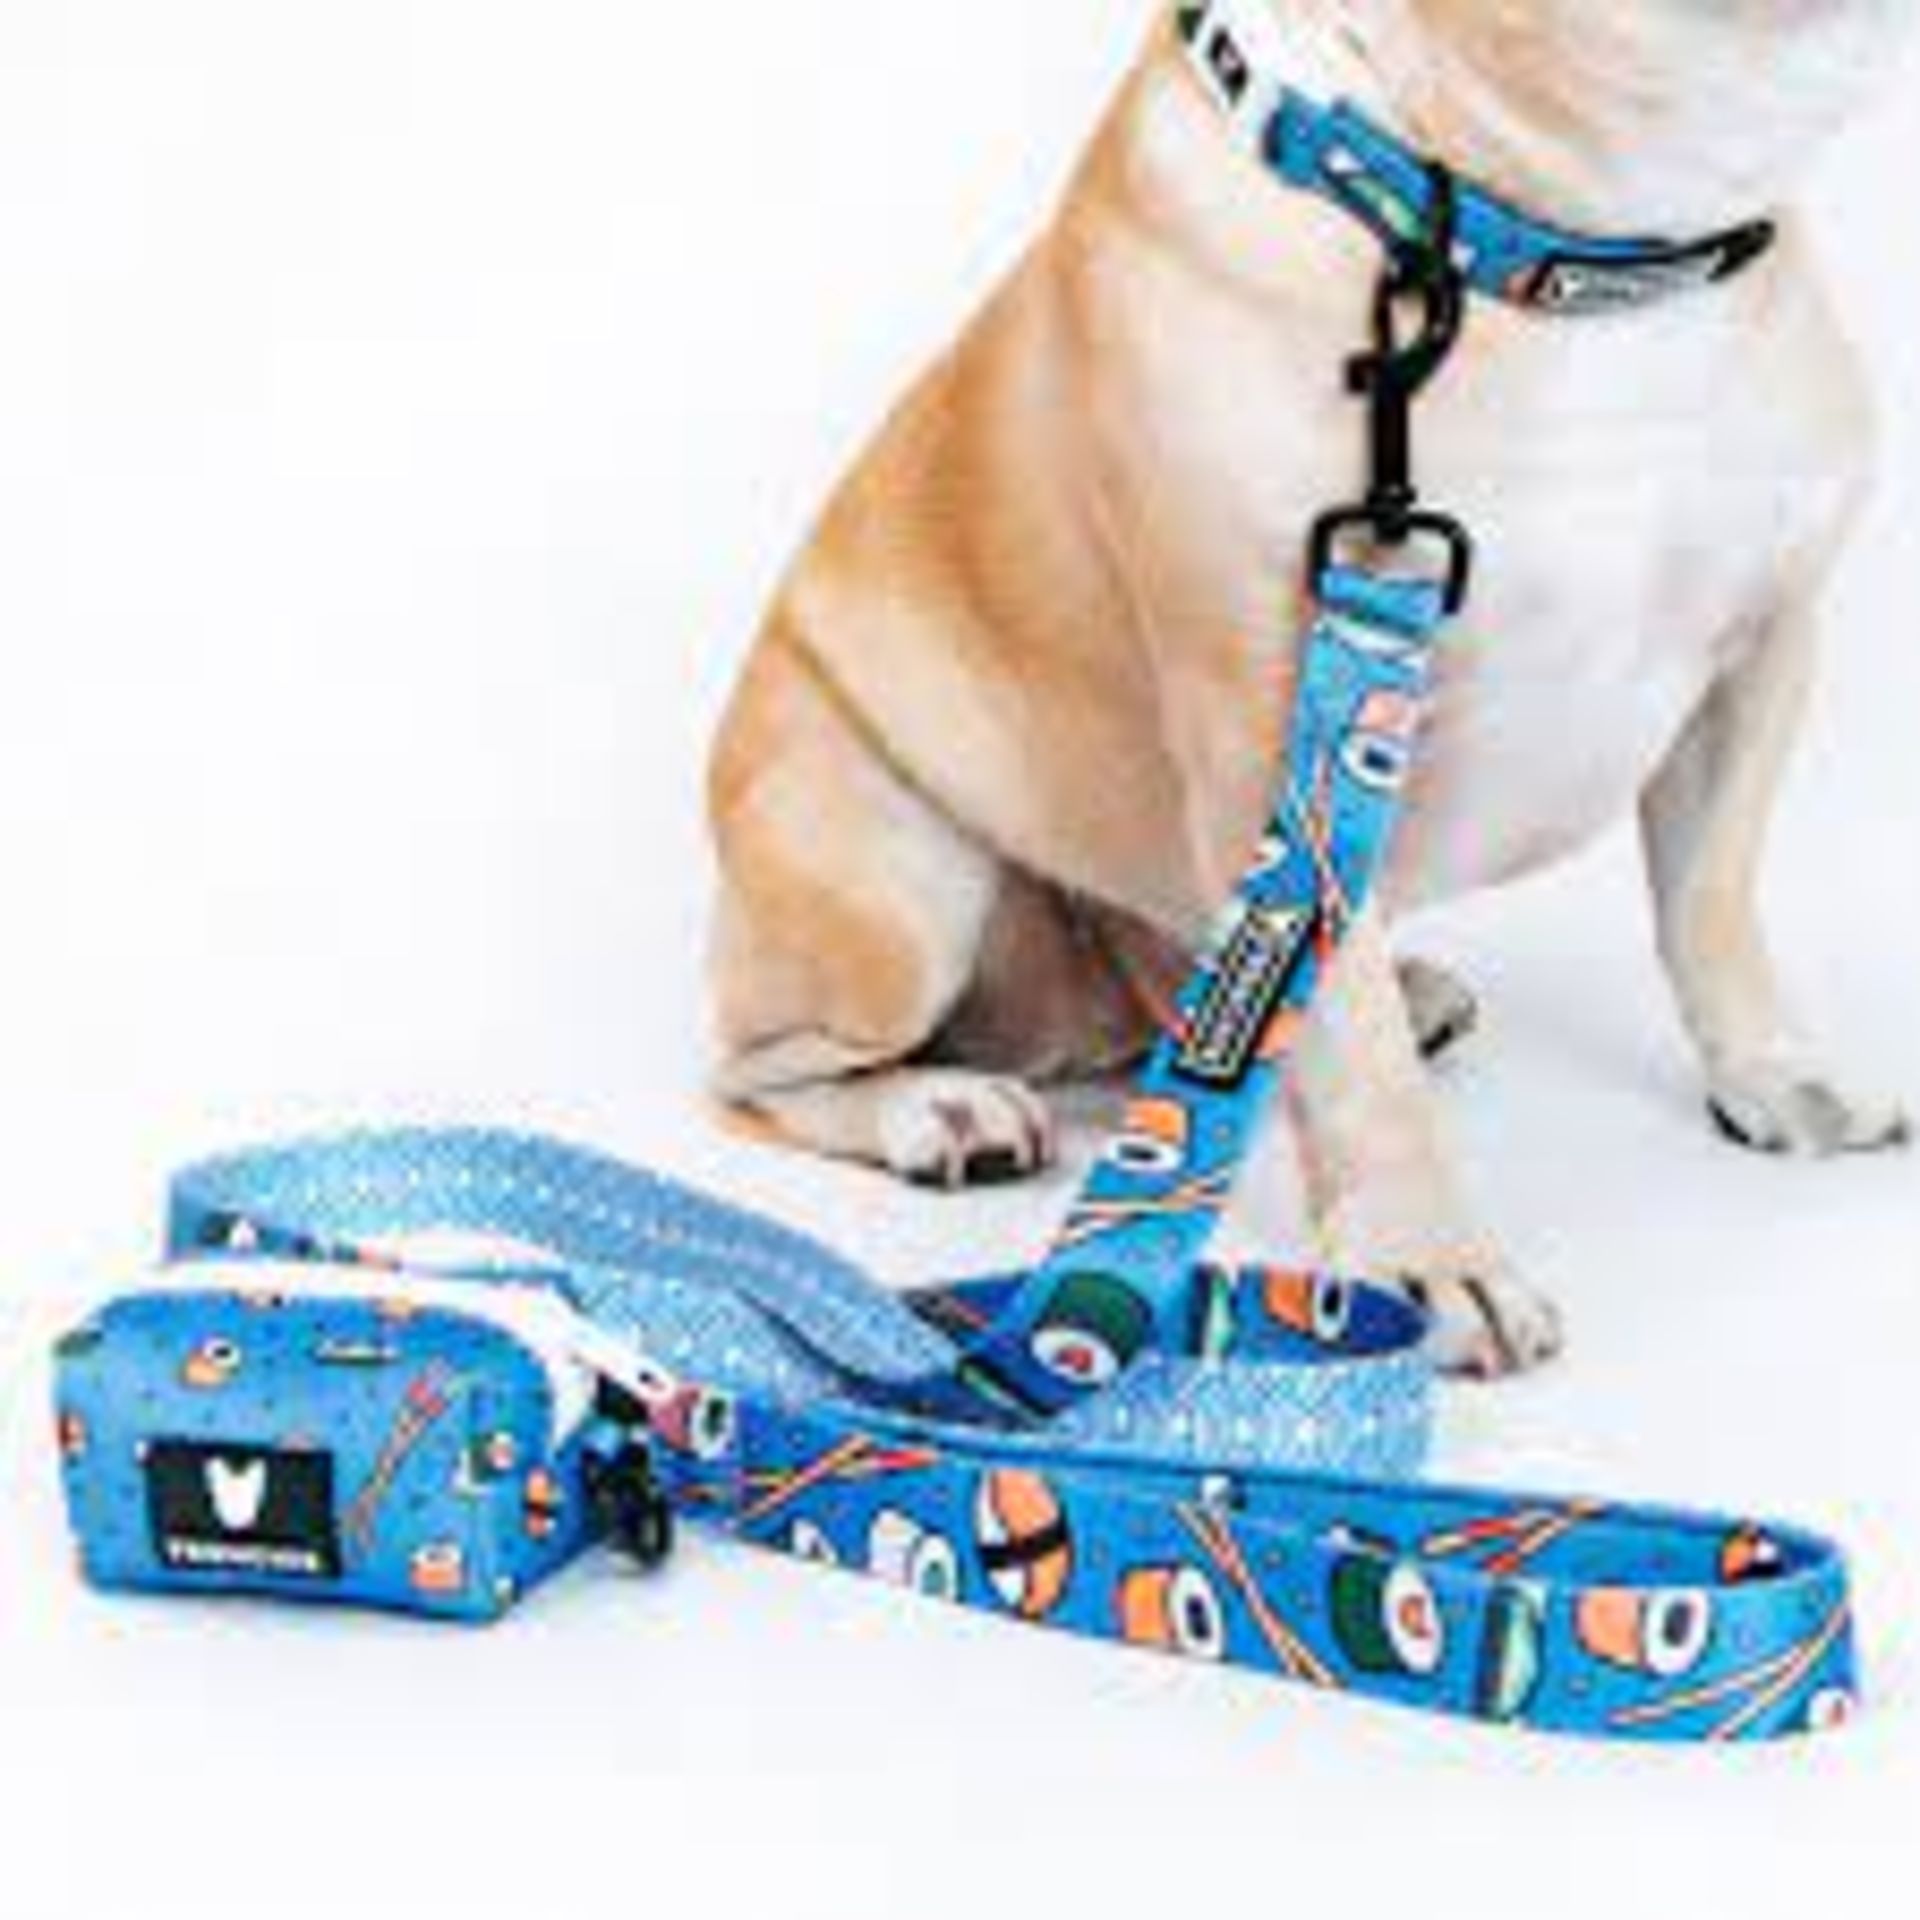 Bulk Trade Lot 500 X New & Packaged Frenchie The Bulldog Luxury Branded Dog Products. May include